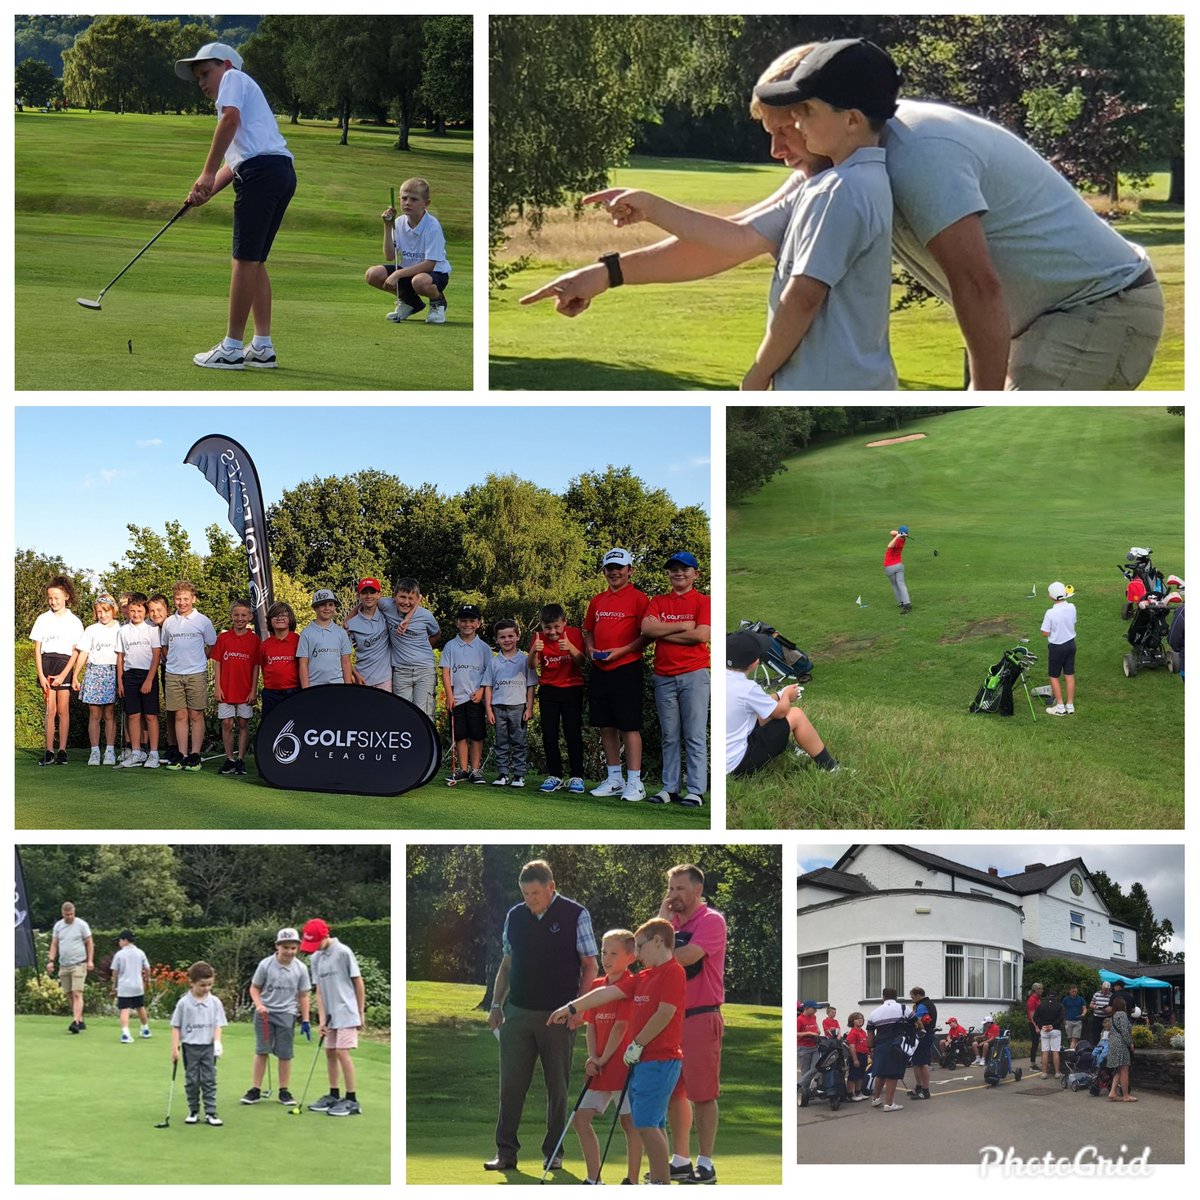 Fantastic afternoon for Golfsixes @GolfNewport, in first match of @wales_golf South East  League.Lots of smiles and laughter, brilliant golf on display and most importantly everyone had FUN😊. Thank you @golffoundation for your support 👍